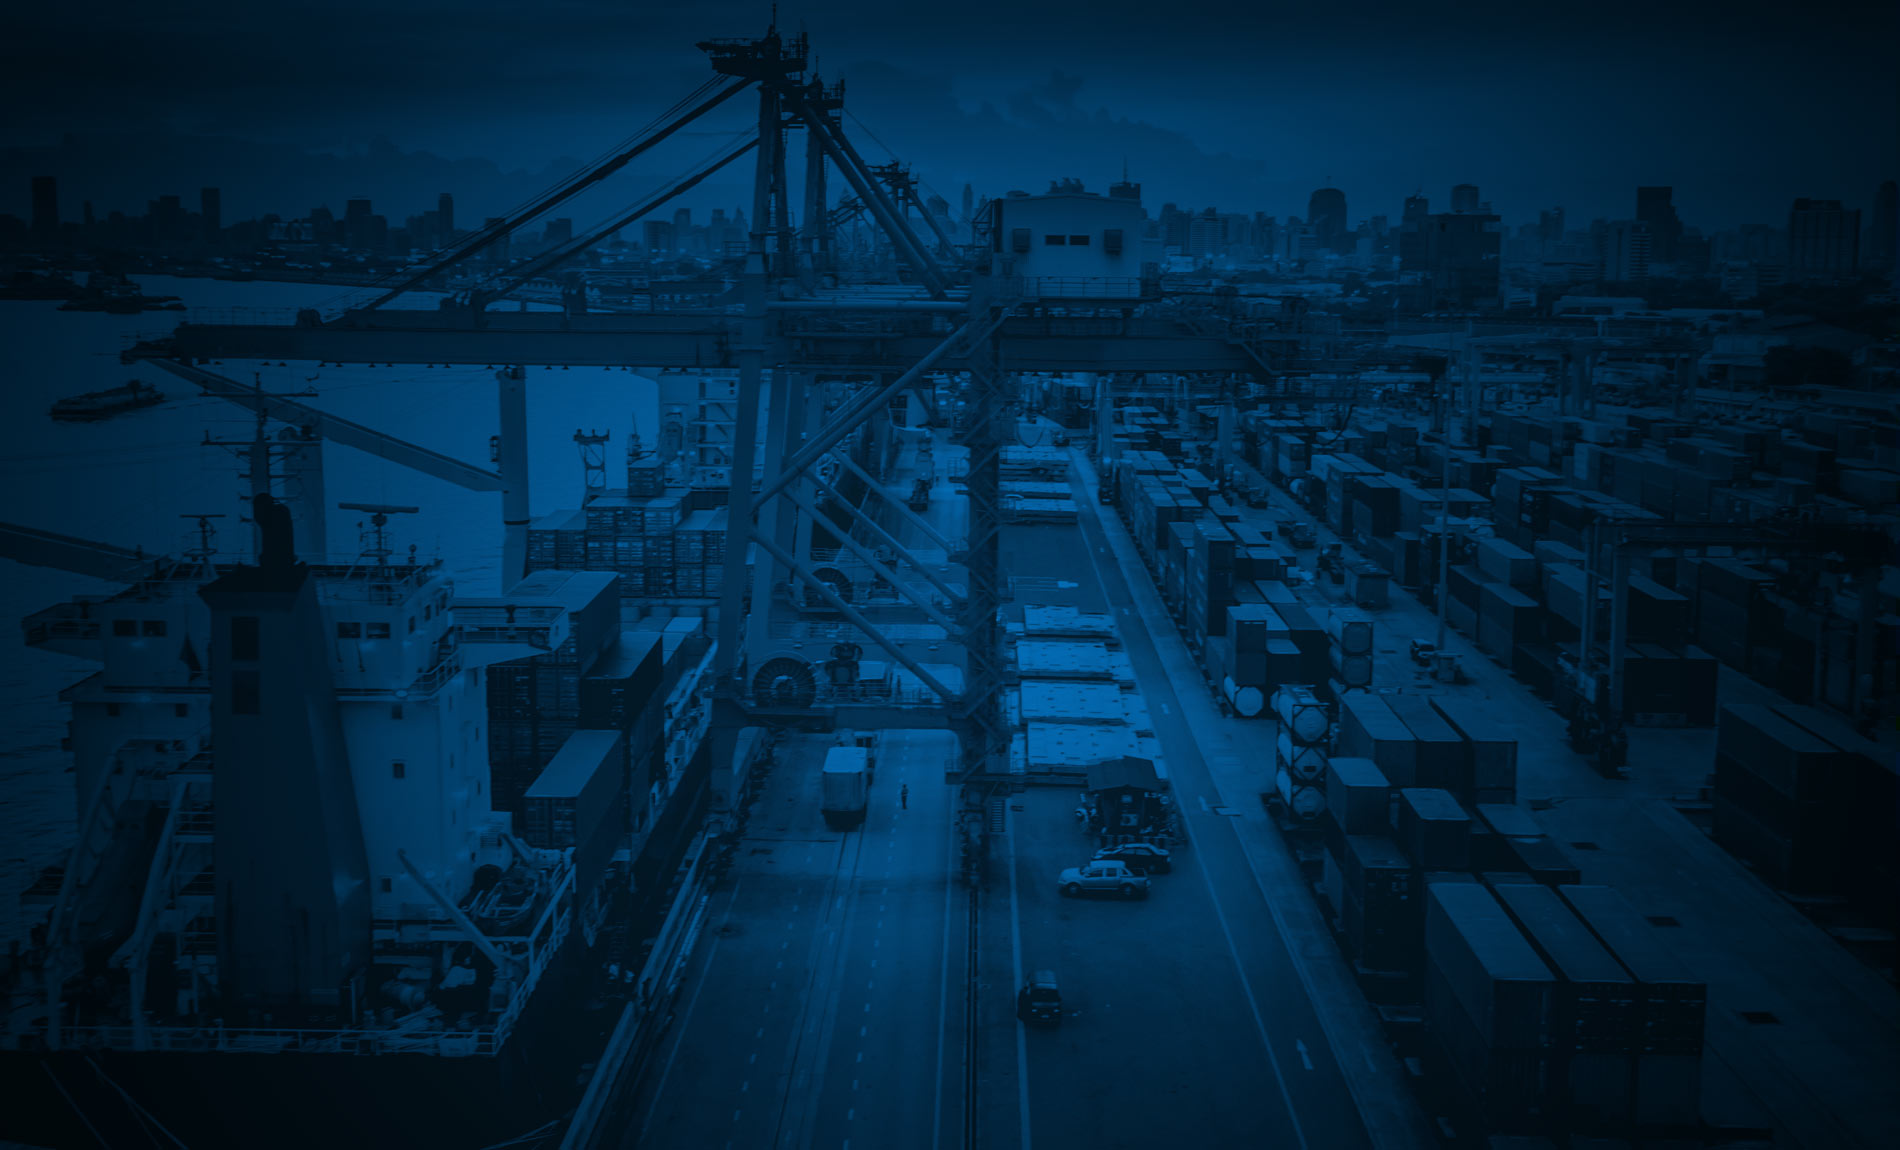 Ocean Freight door-to-door certainty with our LCL, FCL, Project Cargo, and Supply Chain Consulting Services: Manage your freight seamlessly with Radius.